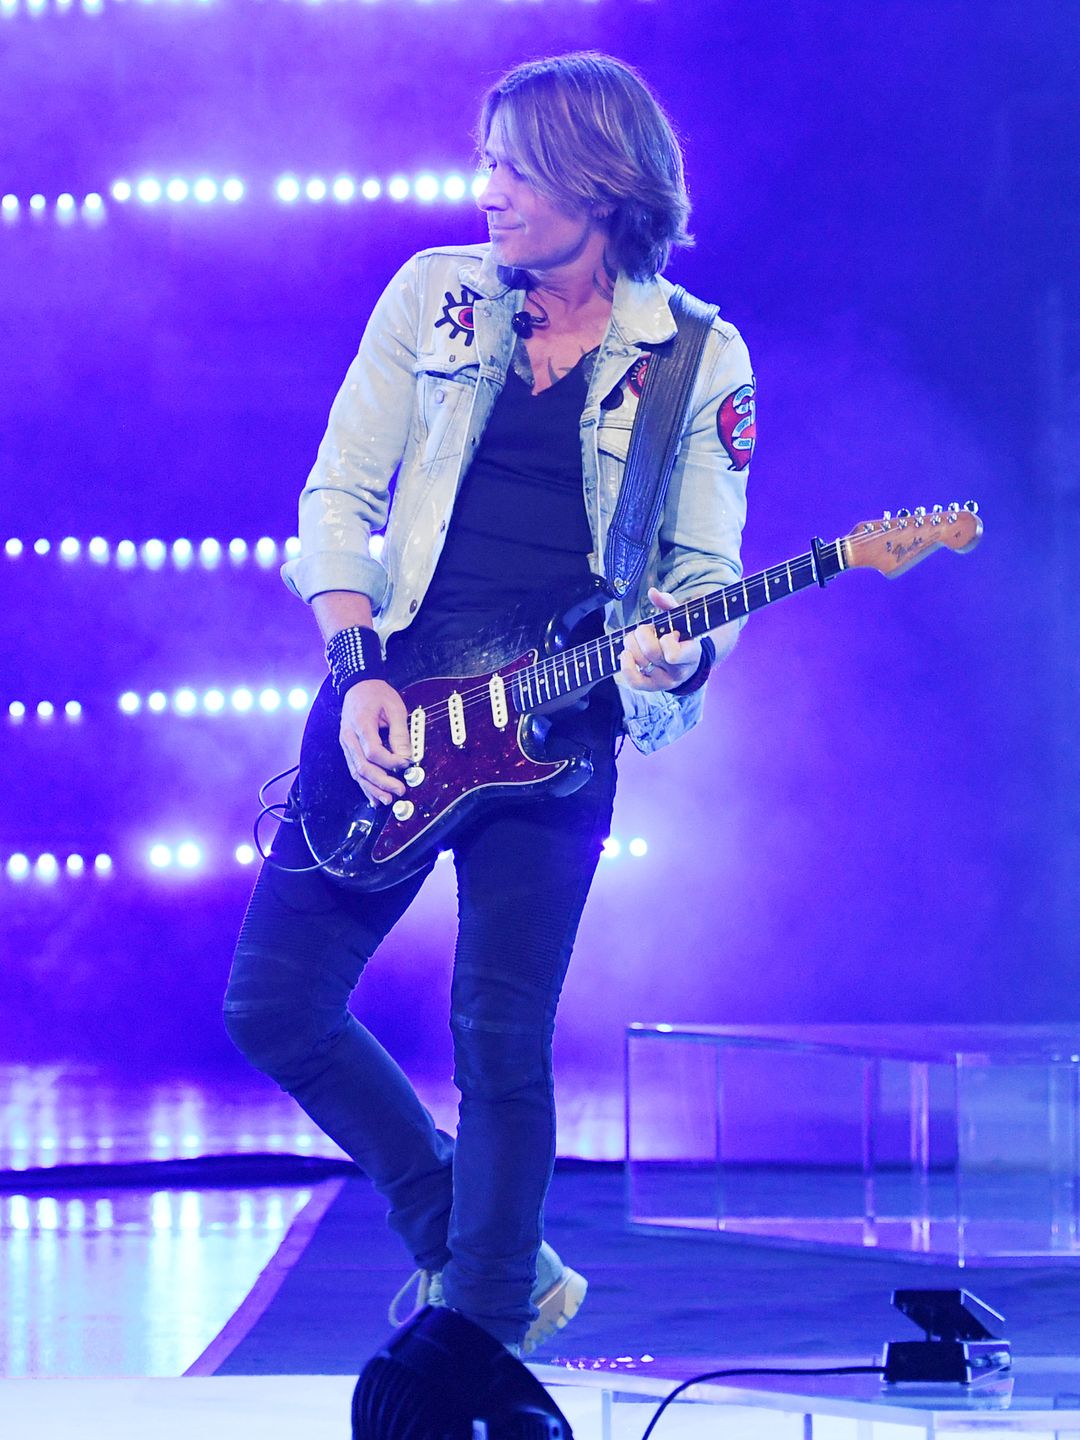 Keith Urban on stage with a guitar